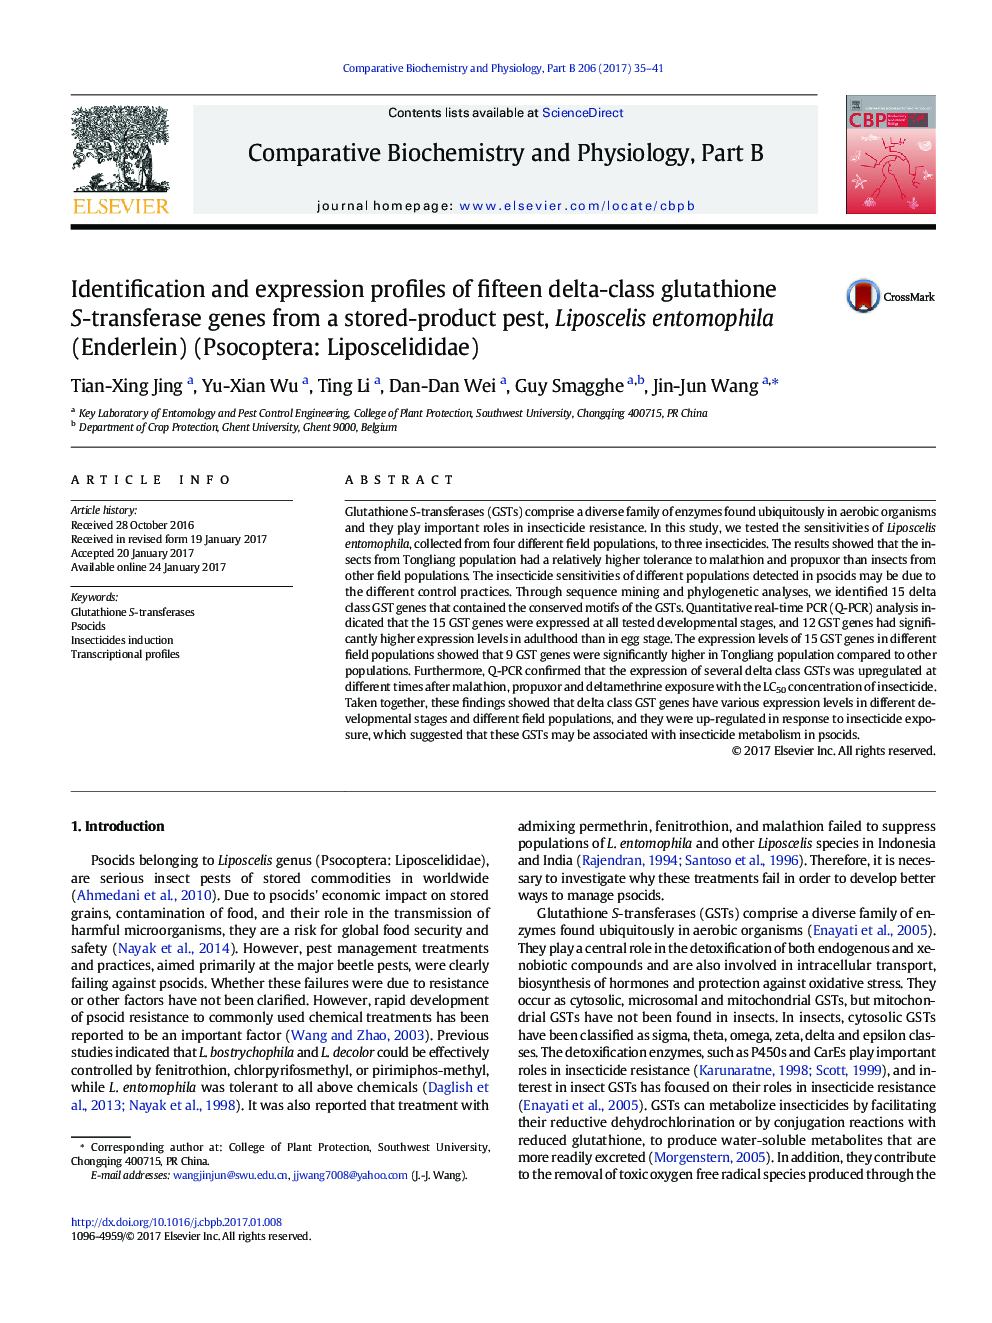 Identification and expression profiles of fifteen delta-class glutathione S-transferase genes from a stored-product pest, Liposcelis entomophila (Enderlein) (Psocoptera: Liposcelididae)